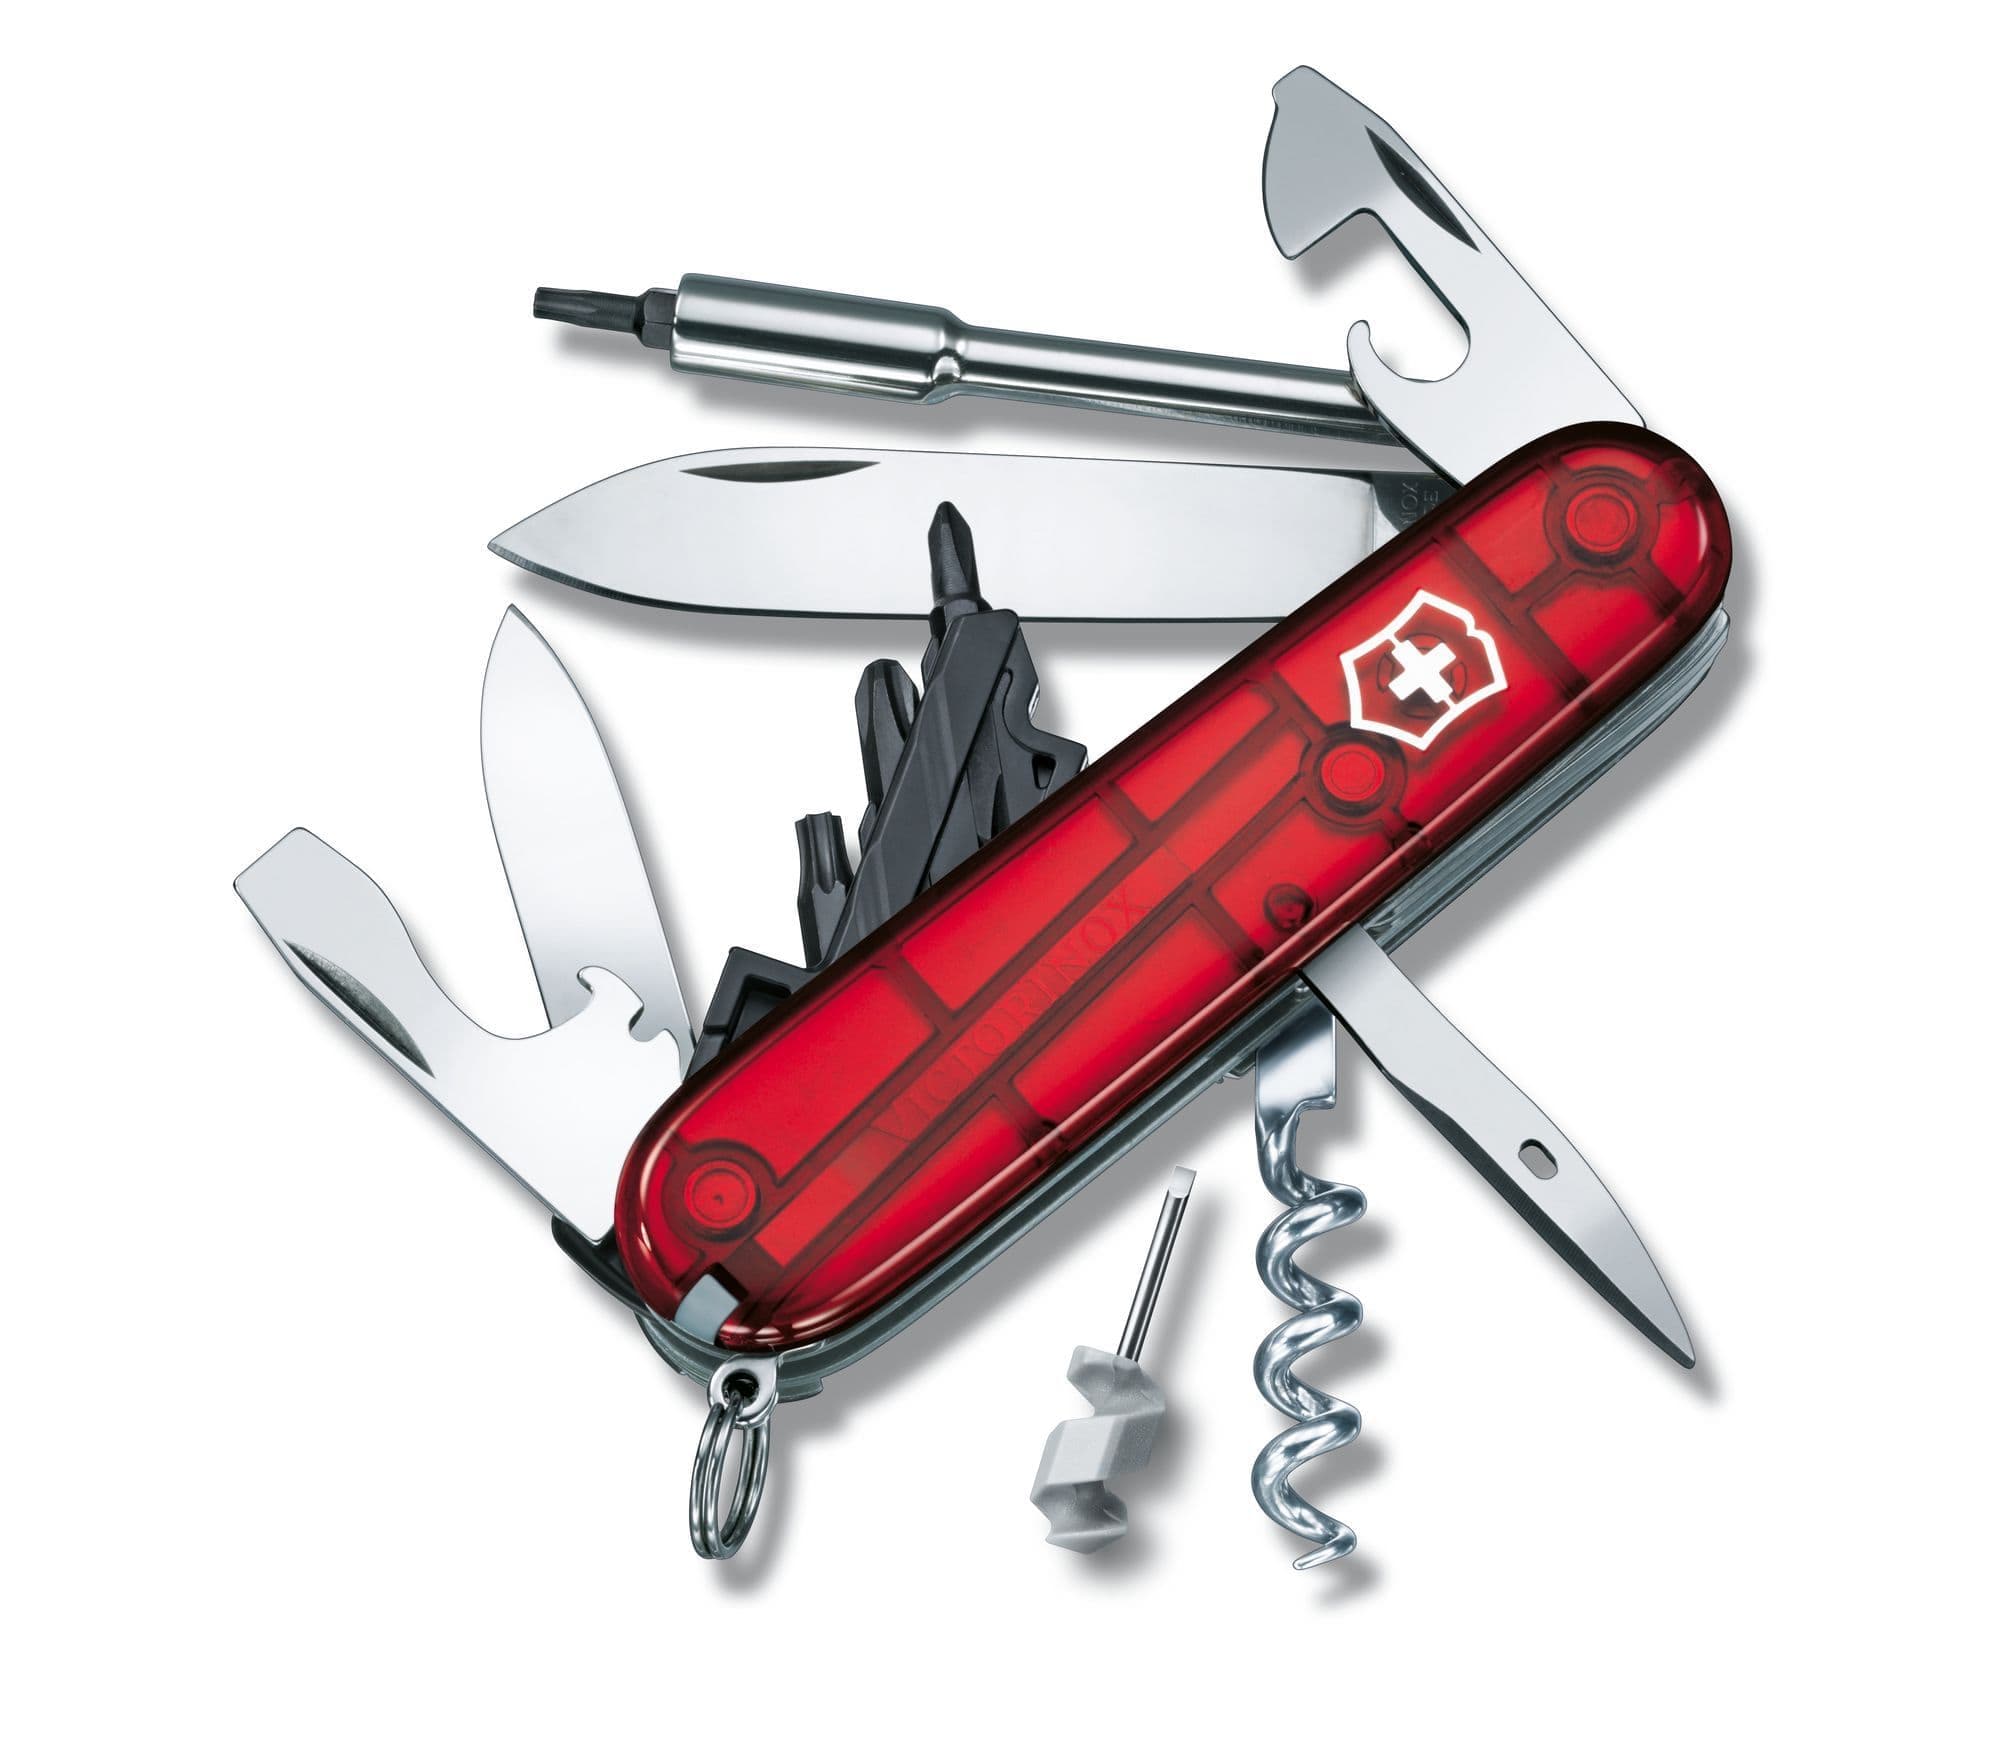 VICTORINOX SWISS ARMY KNIFE CYBERTOOL RED TRANSLUSANT WITH 27 FUNCTIONS